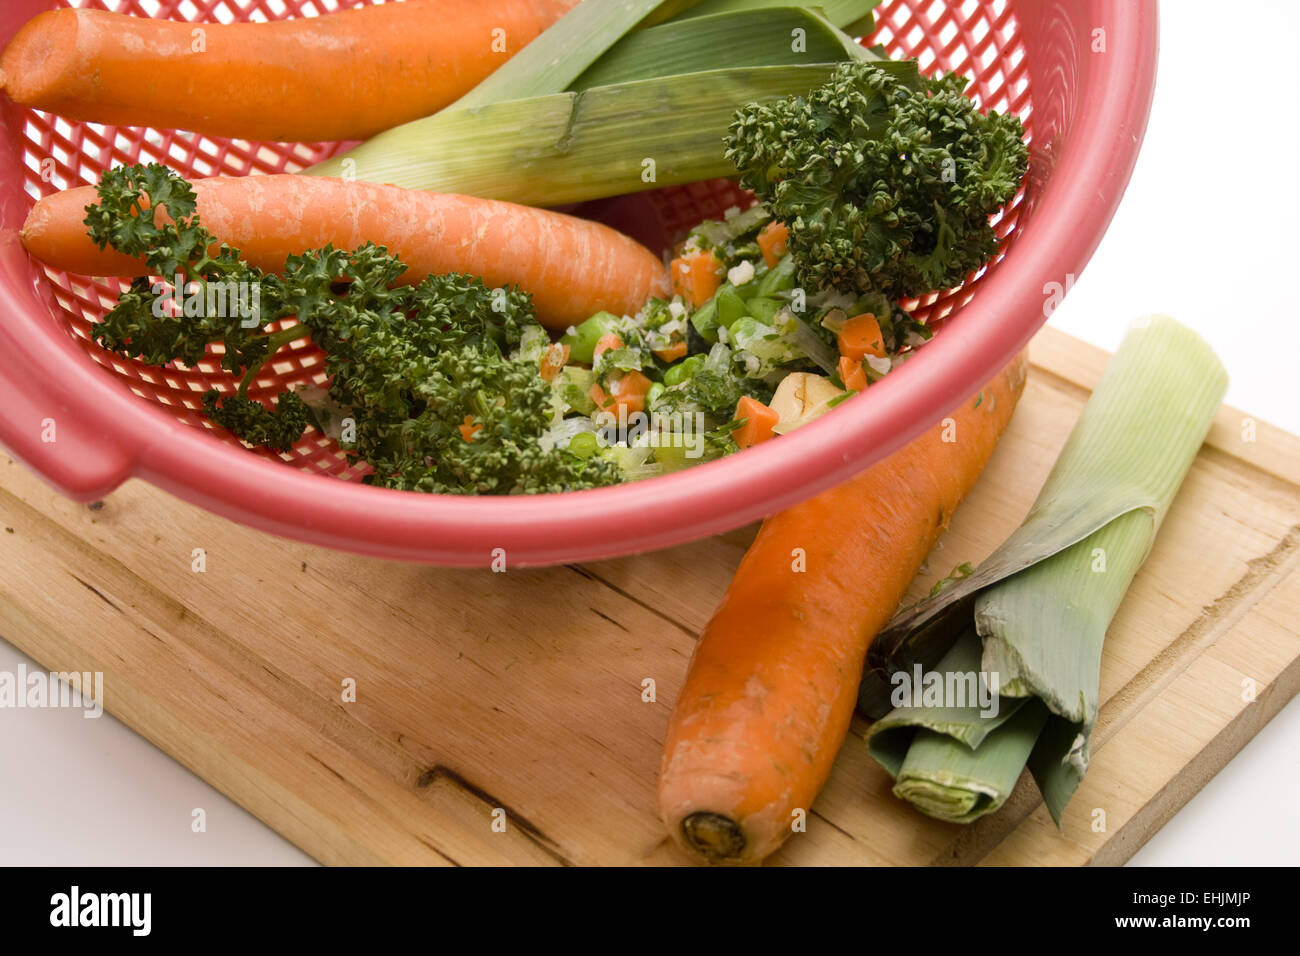 Soup vegetables in the sieve Stock Photo